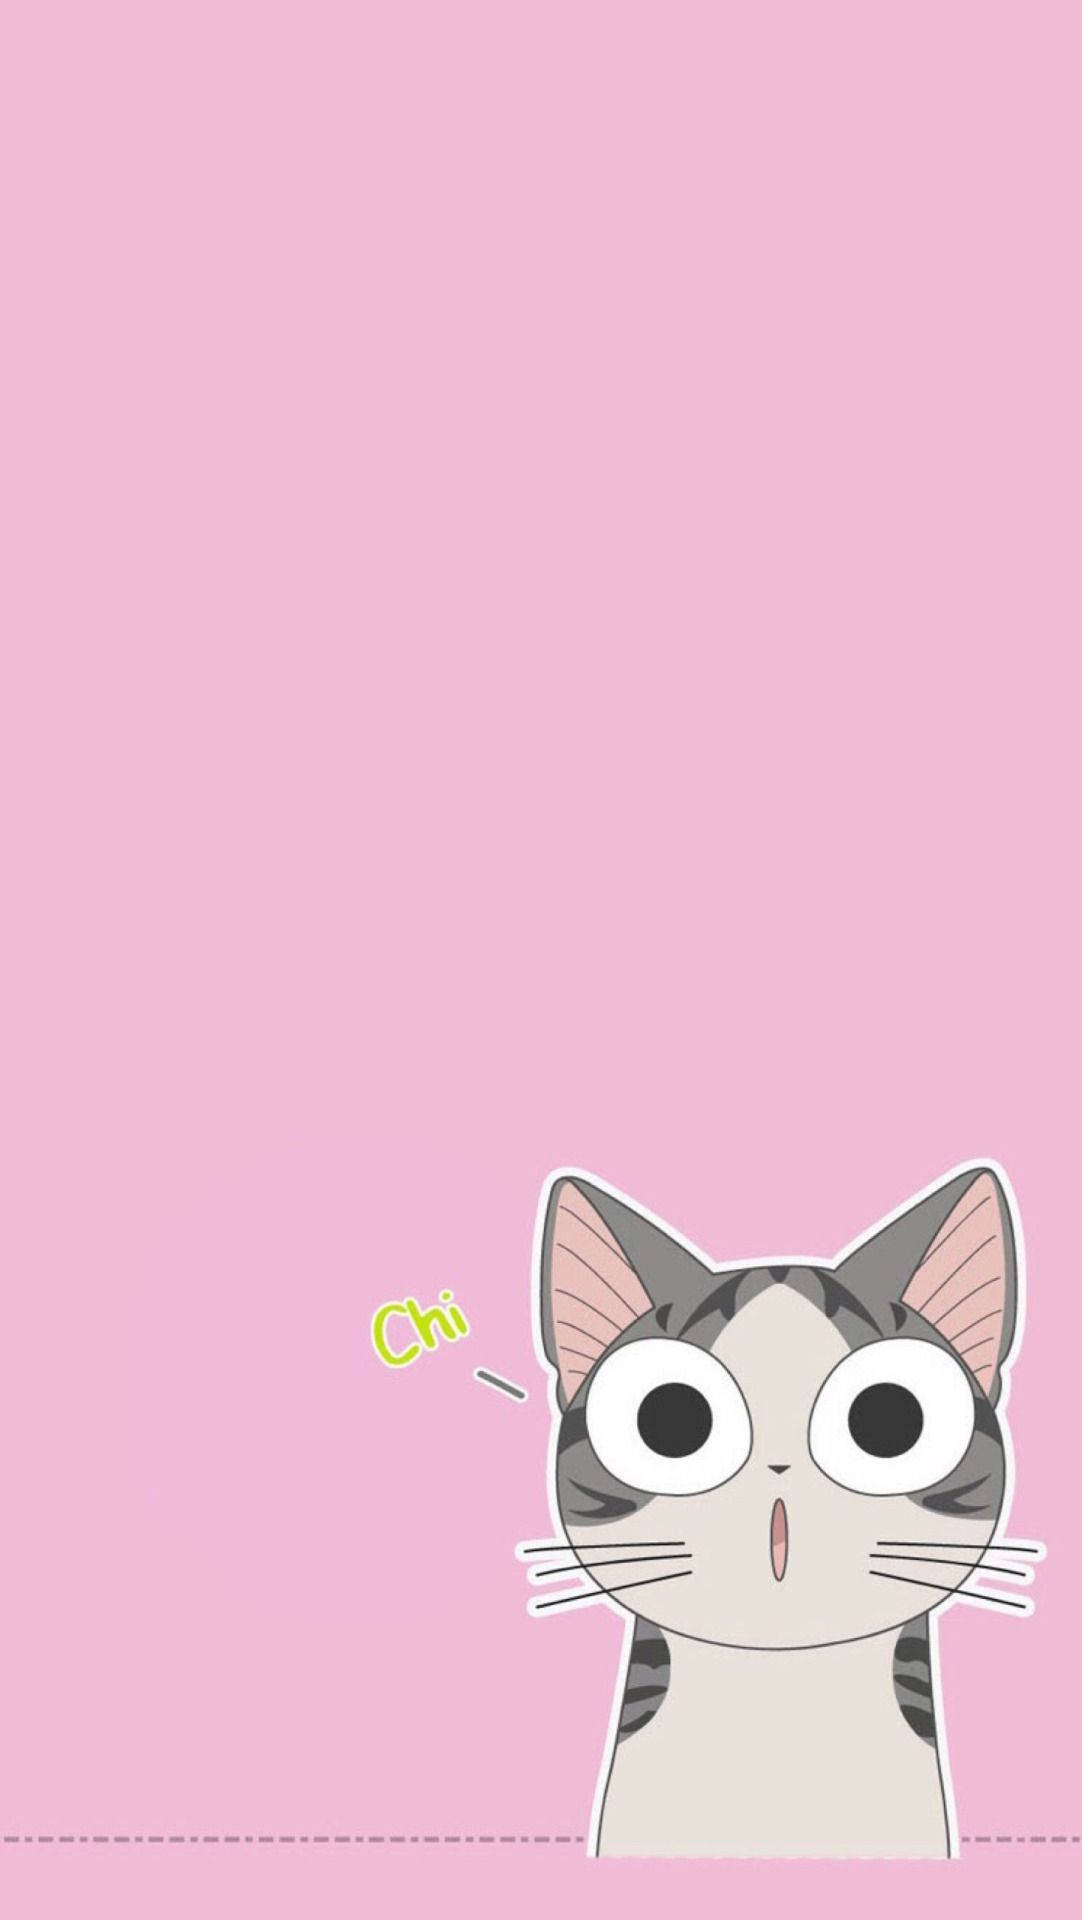 Download Cute And Pink Hello Kitty Wallpaper | Wallpapers.com